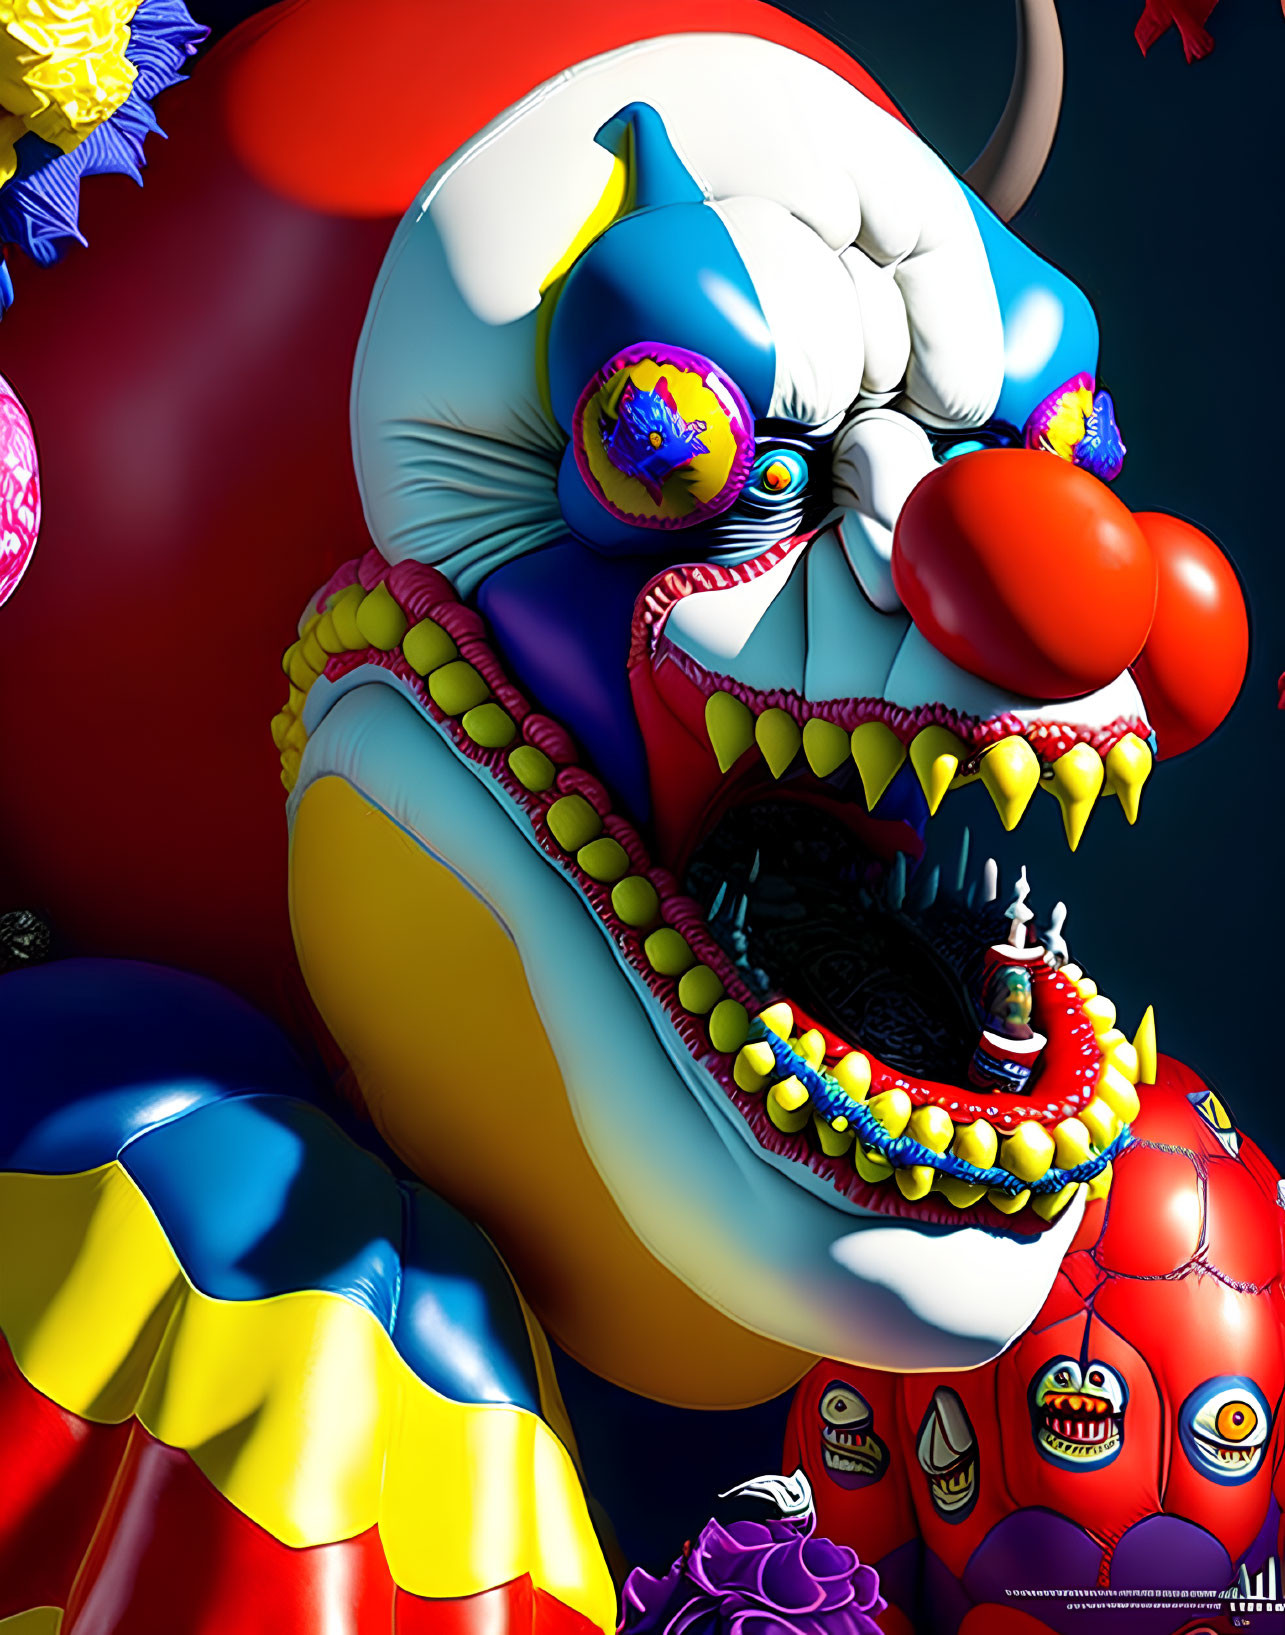 Colorful surreal clown face with open mouth revealing dark abyss and intricate designs.